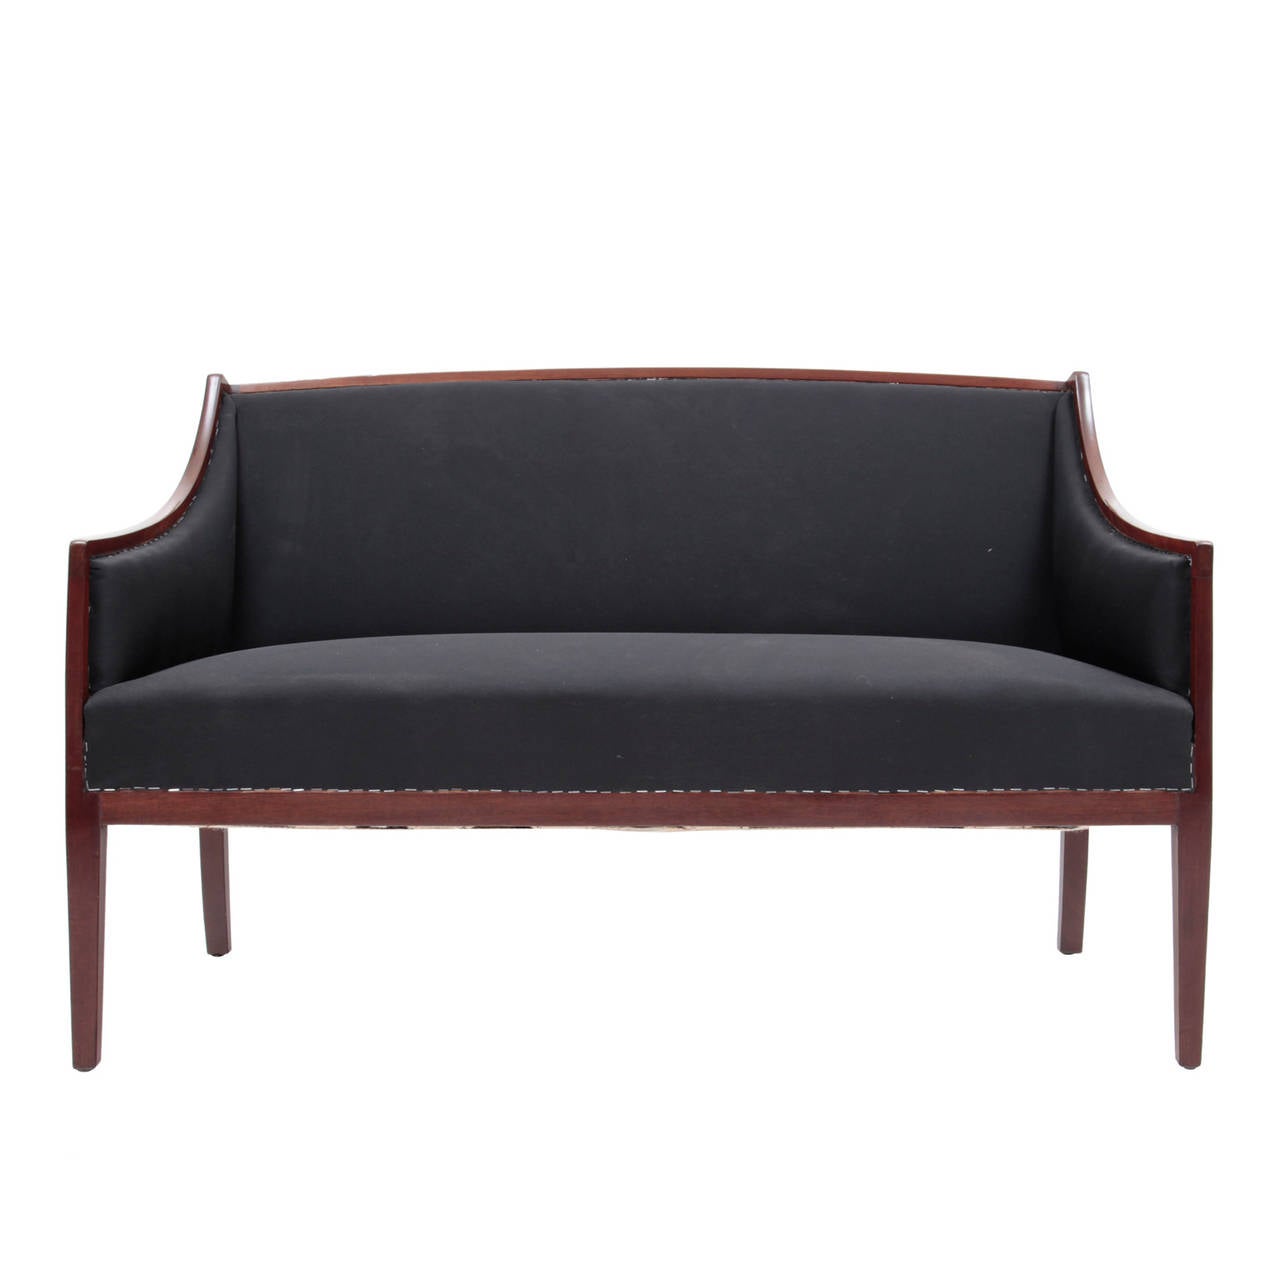 Wonderful French Art Deco bench with elegantly curved armrests, which rise towards the backrest. 
The backrest is slightly curved. The bench stands on four tapered legs, the rear legs are slightly bend. Backrest, seat, and armrests are upholstered